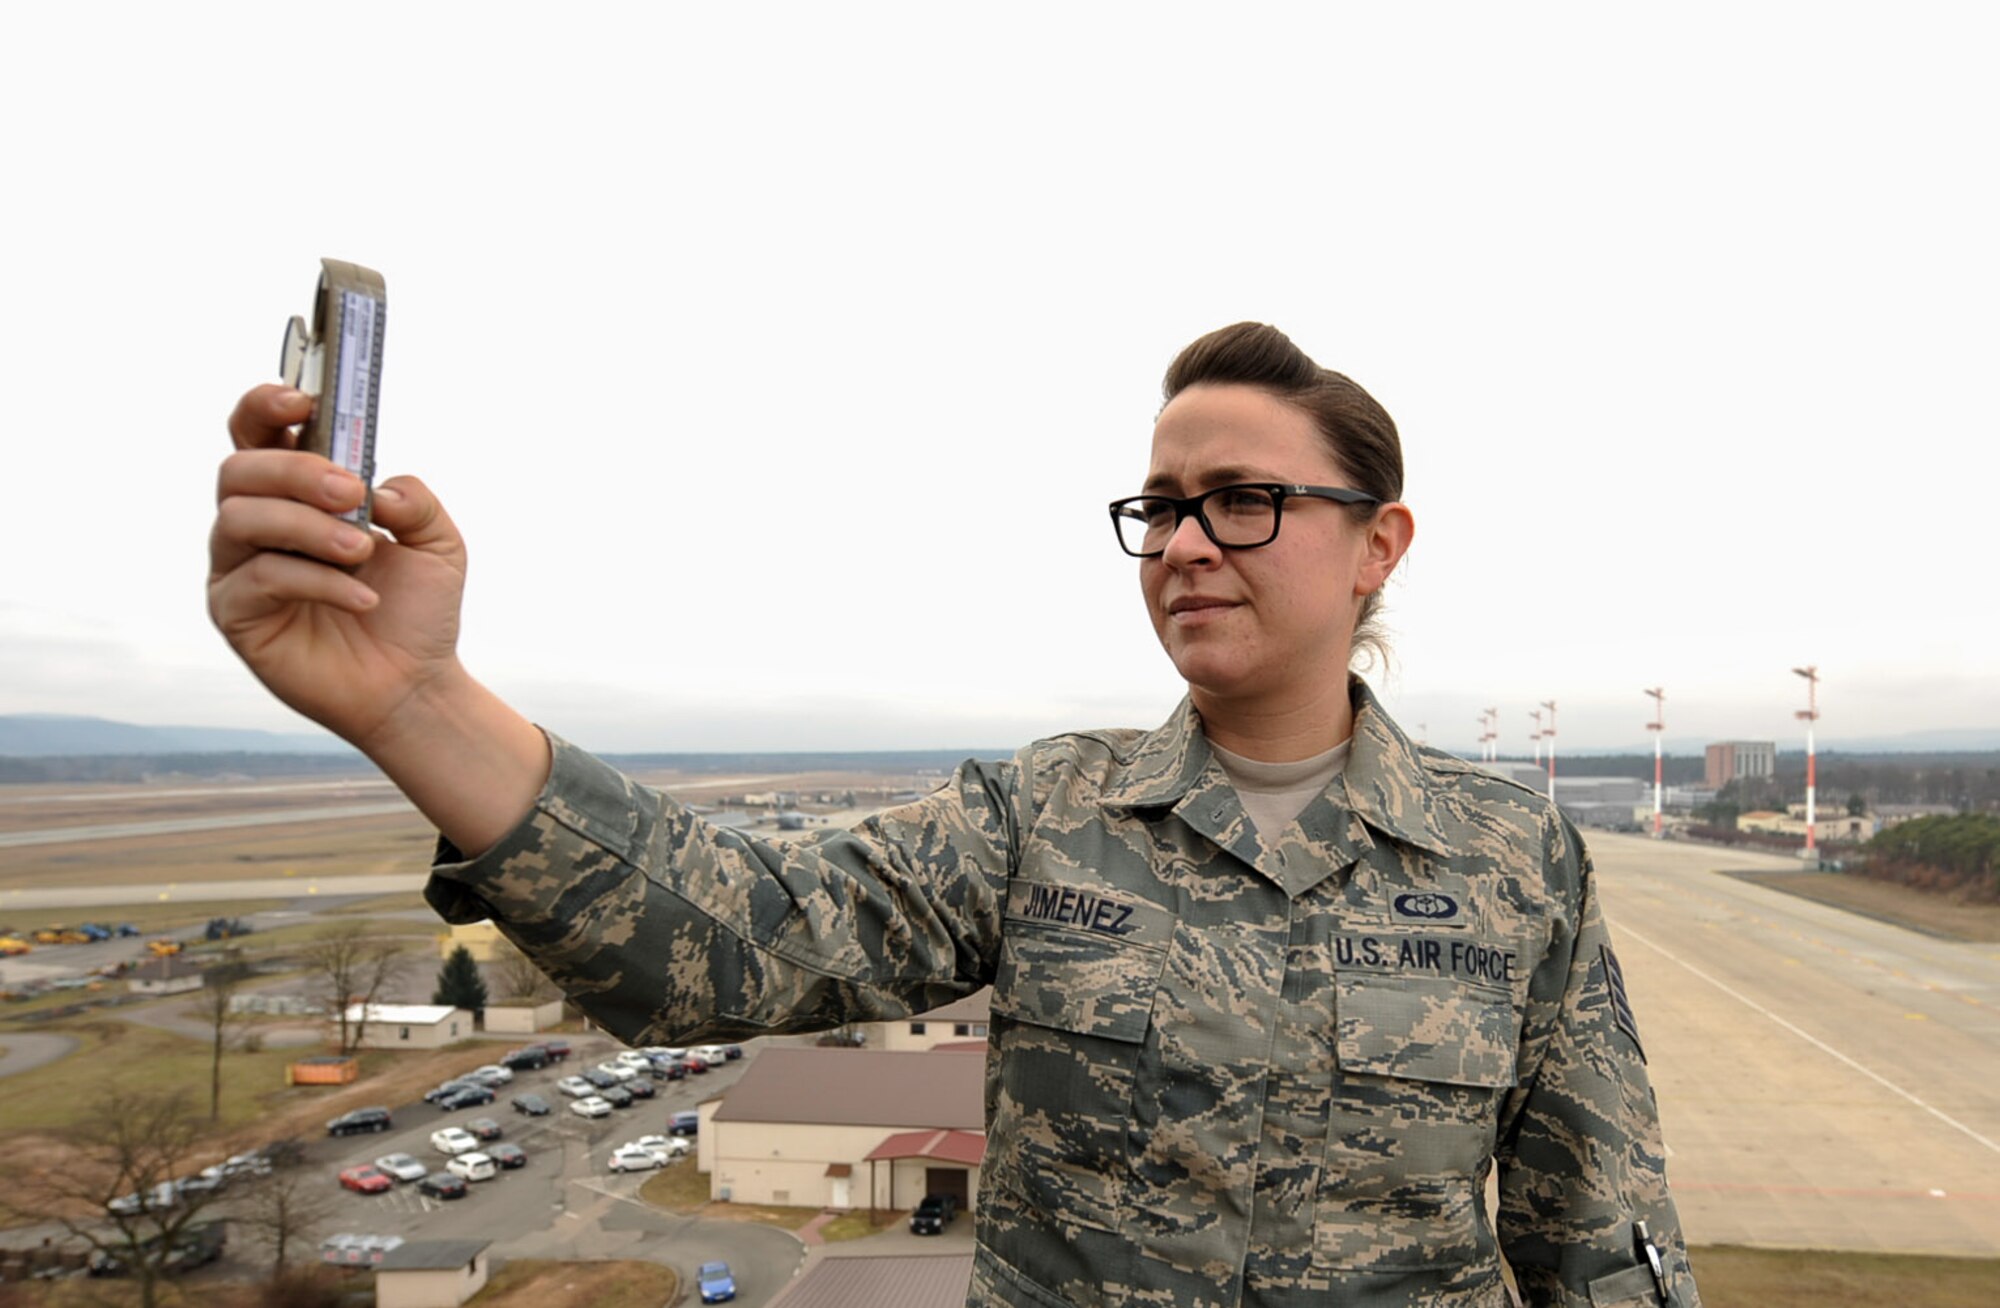 Staff Sgt. Nichol Jimenez, 86th OSS weather forecaster craftsman, holds a hand-held weather instrument called a kestrel on Ramstein Air Base, Germany, Feb. 7, 2017. Jimenez was awarded 2016’s Air Force Weather Airman of the Year while providing support to both the 37th and 76th Airlift Squadrons. (U.S. Air Force photo by Airman 1st Class Savannah L. Waters)